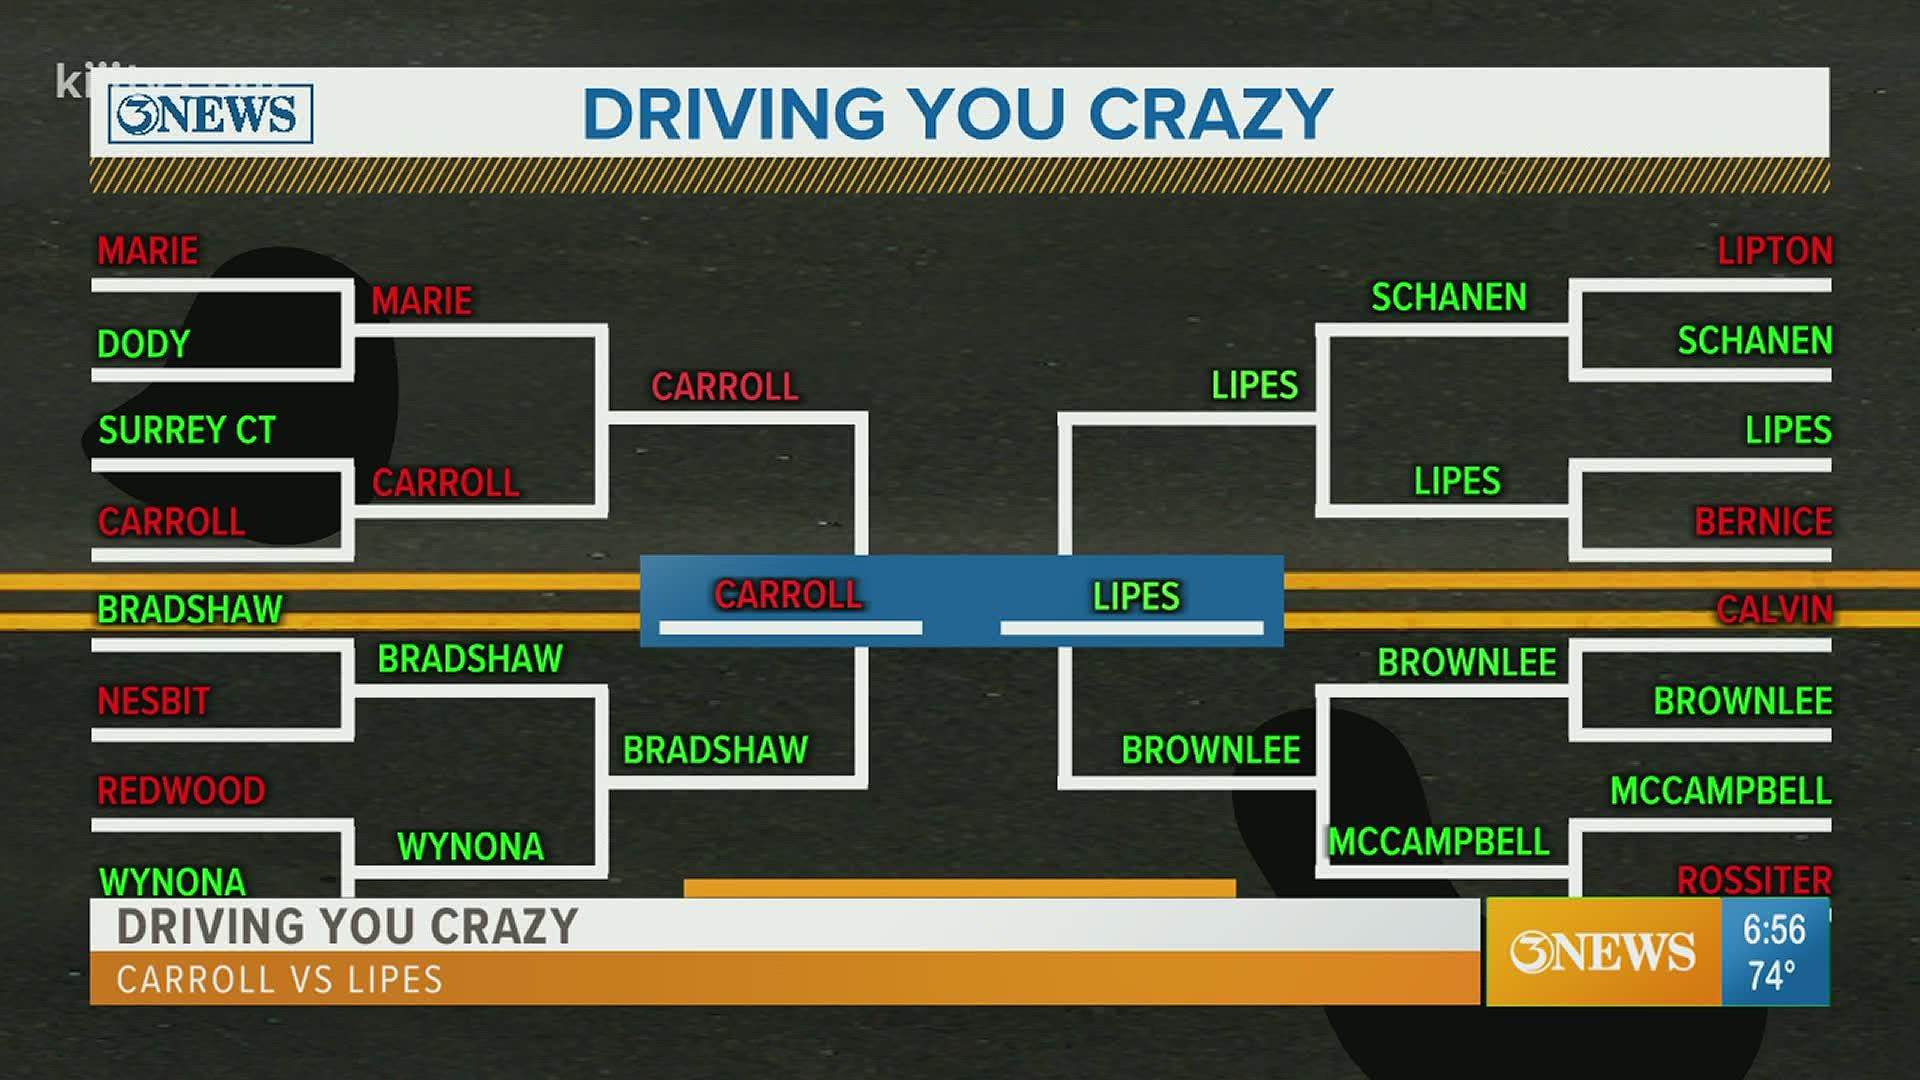 We have reached the final two streets in the Driving You Crazy bracket.